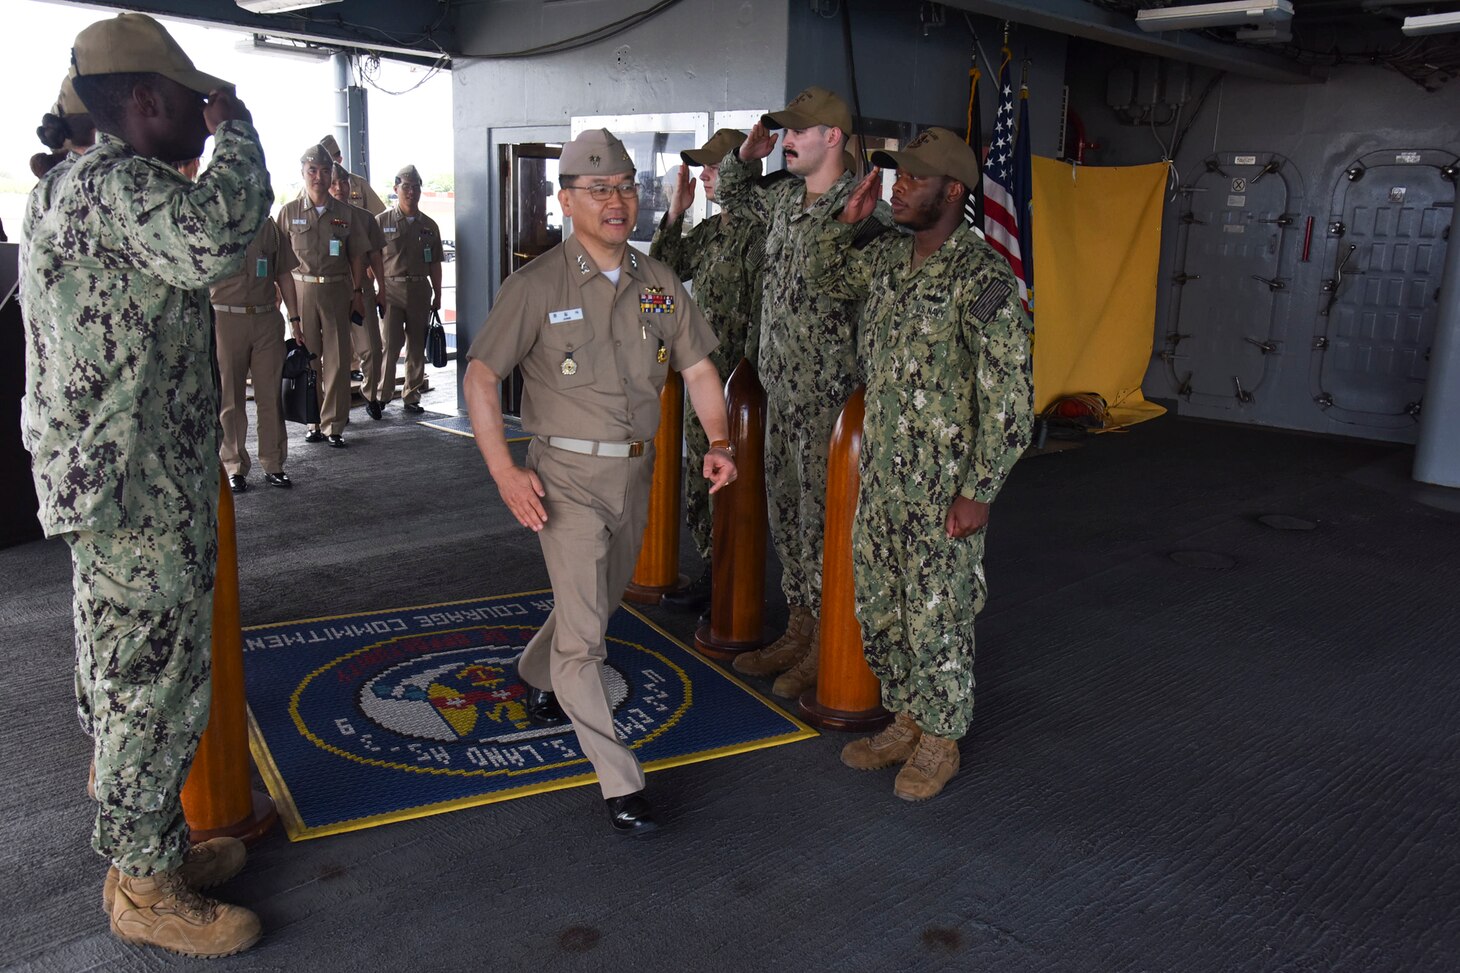 APRA HARBOR, Guam (June 8, 2019) Rear Adm. Jung II Shik, commander of the Republic of Korea Navy Submarine Force, comes aboard the submarine tender USS Emory S. Land (AS 39) for a scheduled tour, June 18.  Rear Adm. Jung is in Guam attending the 49th annual Submarine Warfare Committee meeting. During the meeting, U.S. and Korean officials discuss interoperability, the planning of combined training opportunities, and continued development of integrated anti-submarine warfare plans.